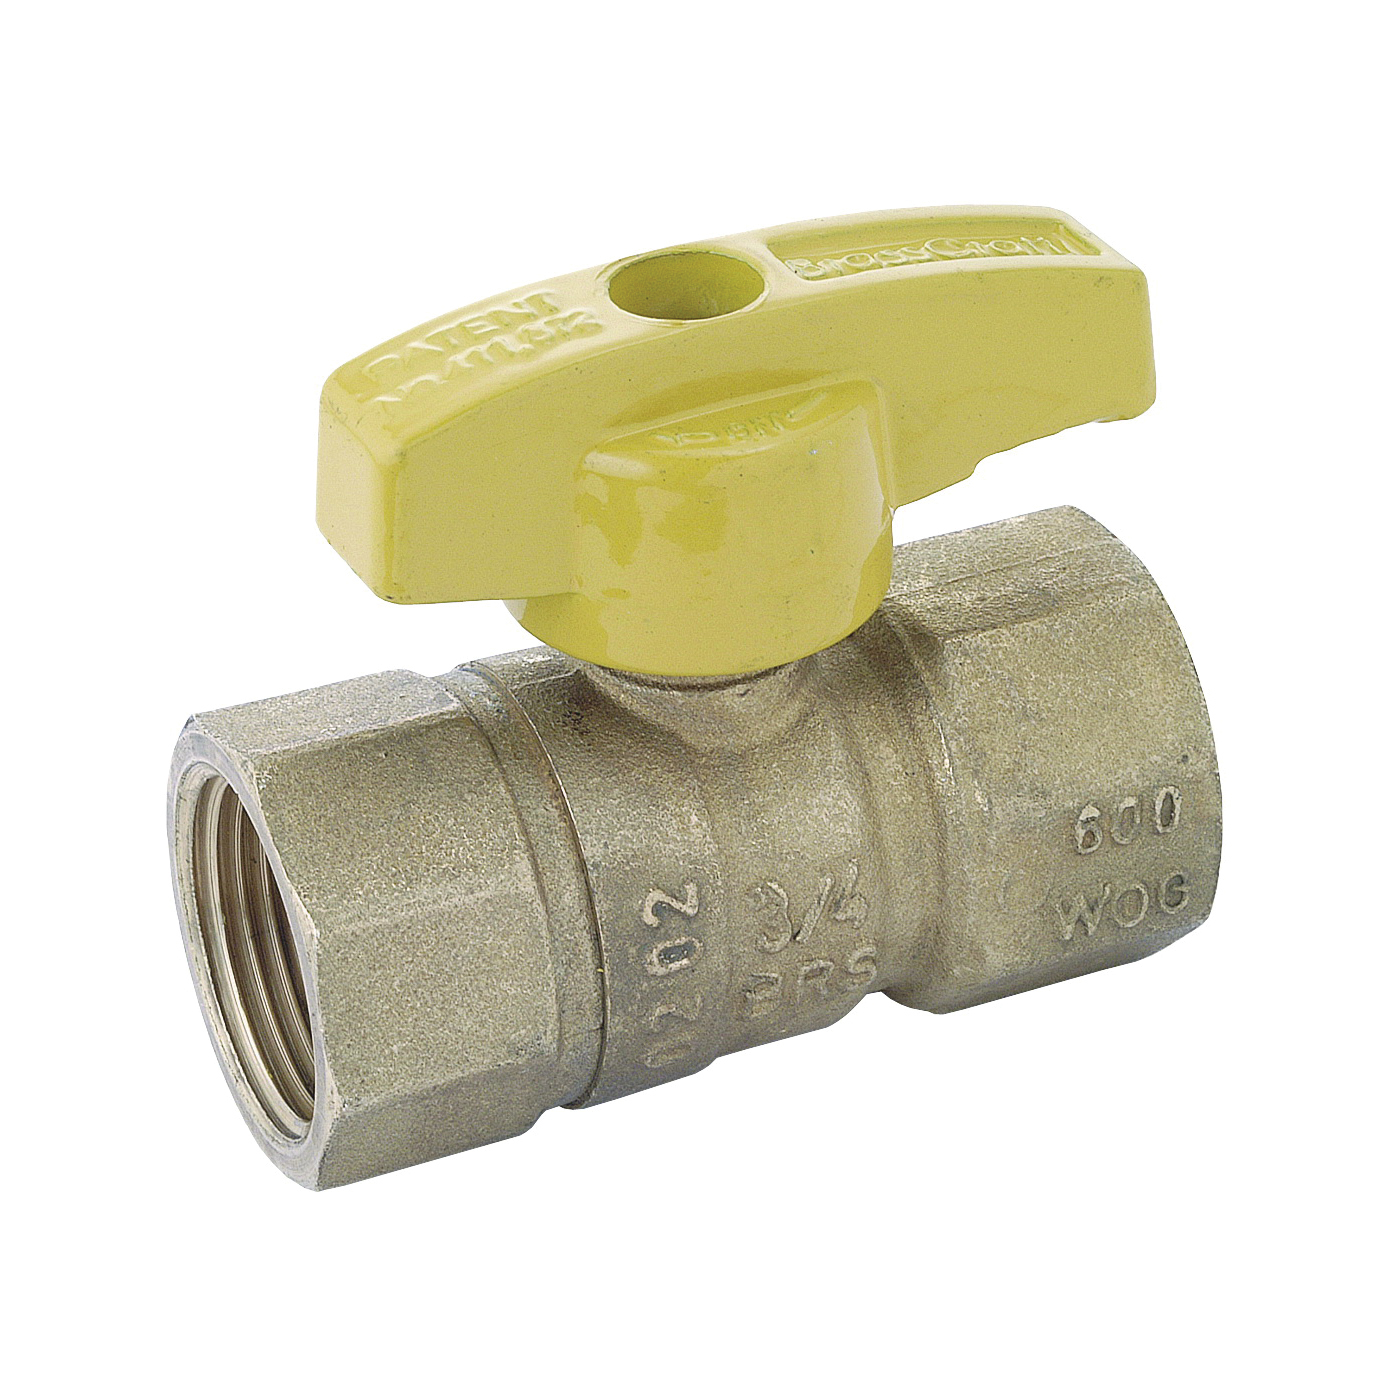 PSBV503-8 Gas Ball Valve, 1/2 in Connection, FIP, 5 psi Pressure, Brass Body